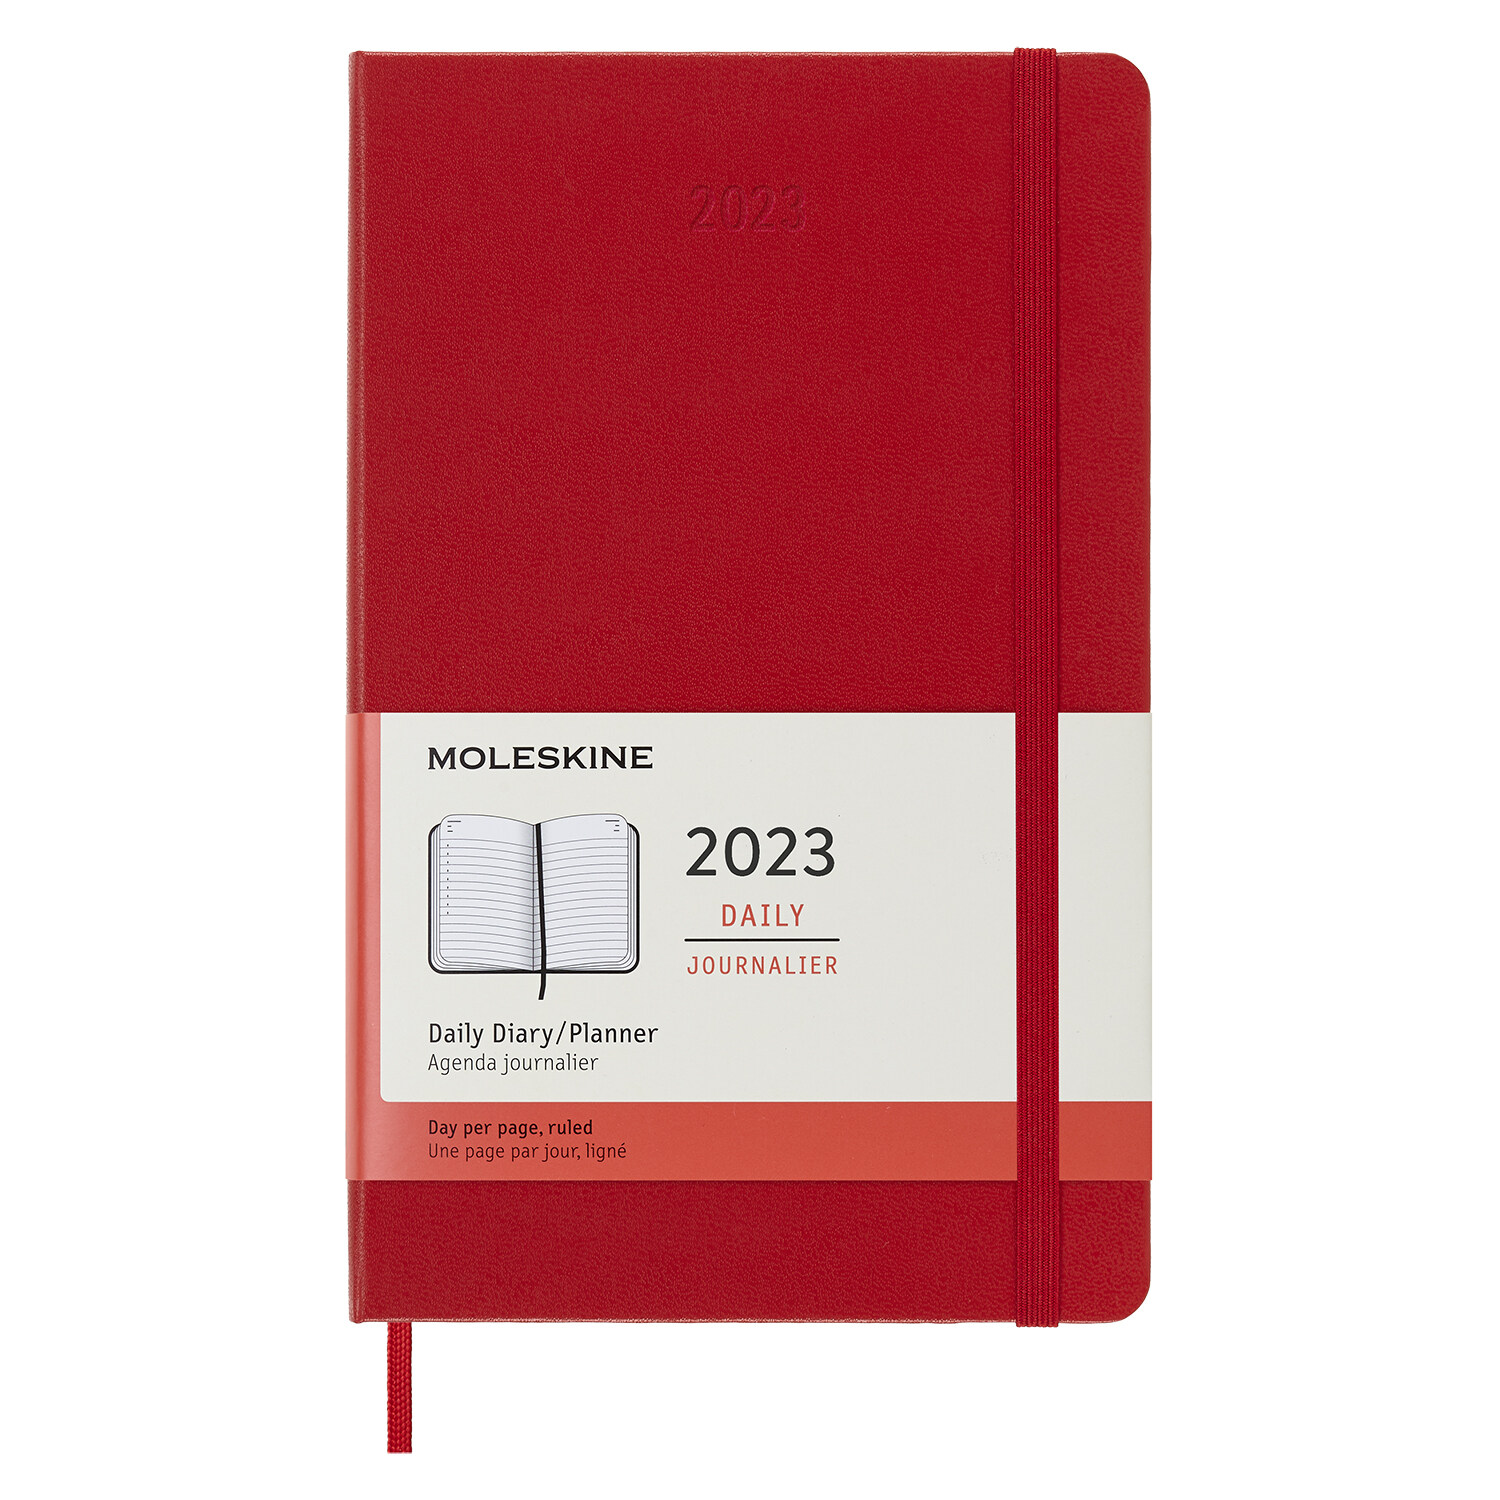 Moleskine 2023 Daily Planner, 12m, Large, Scarlet Red, Hard Cover (5 X 8.25) (Other)